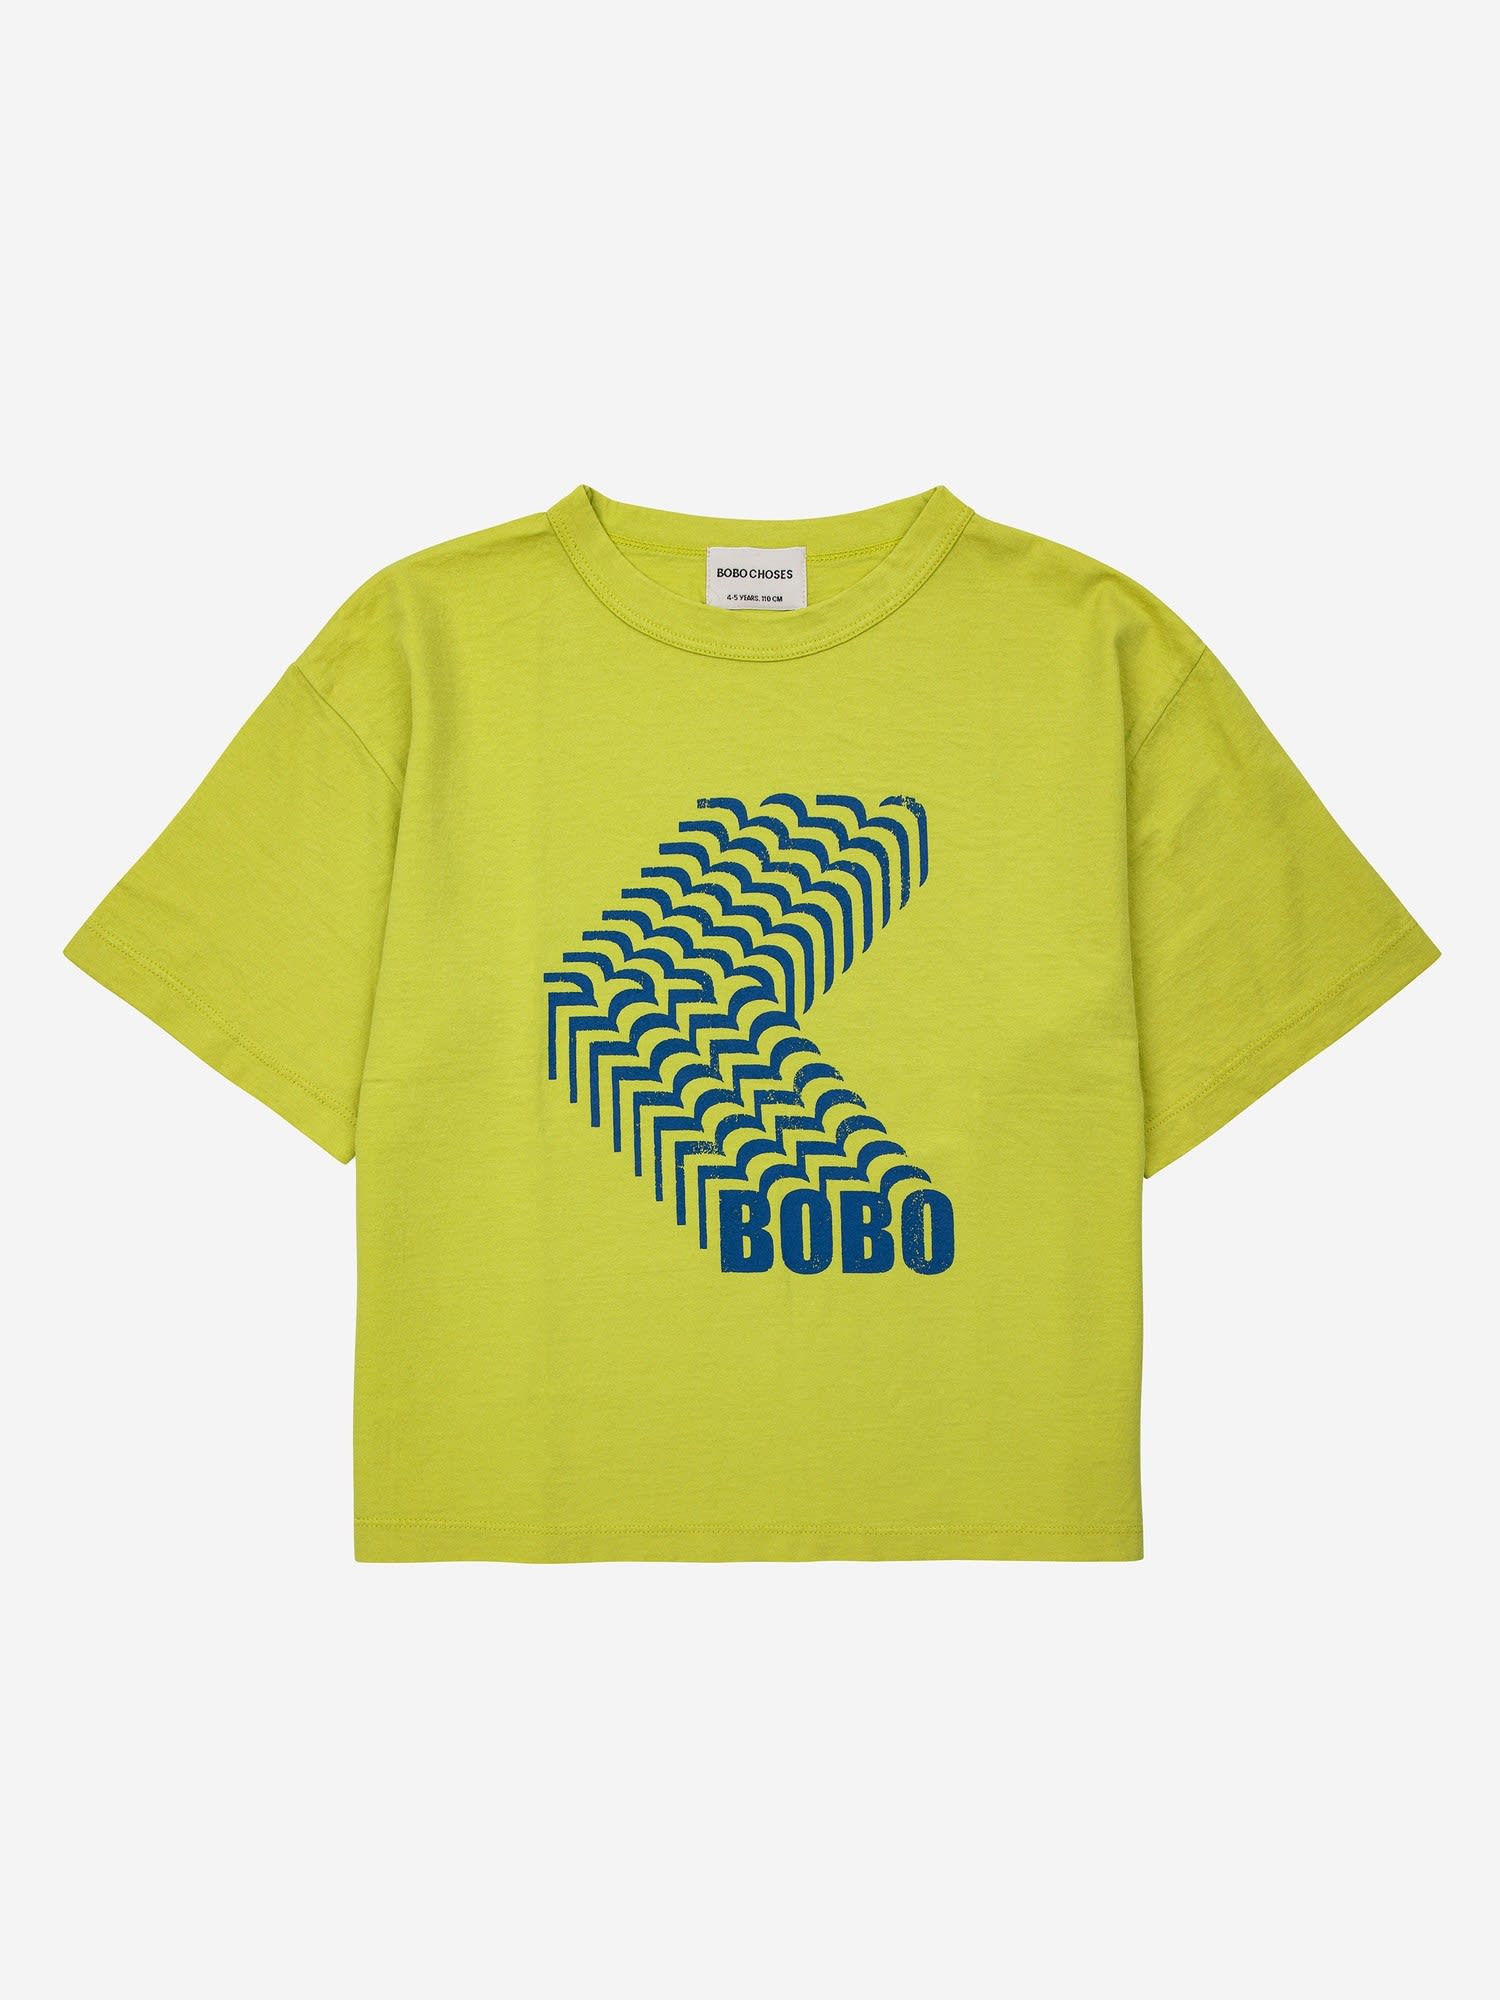 Bobo Choses Green T-shirt For Kids With Blue Print